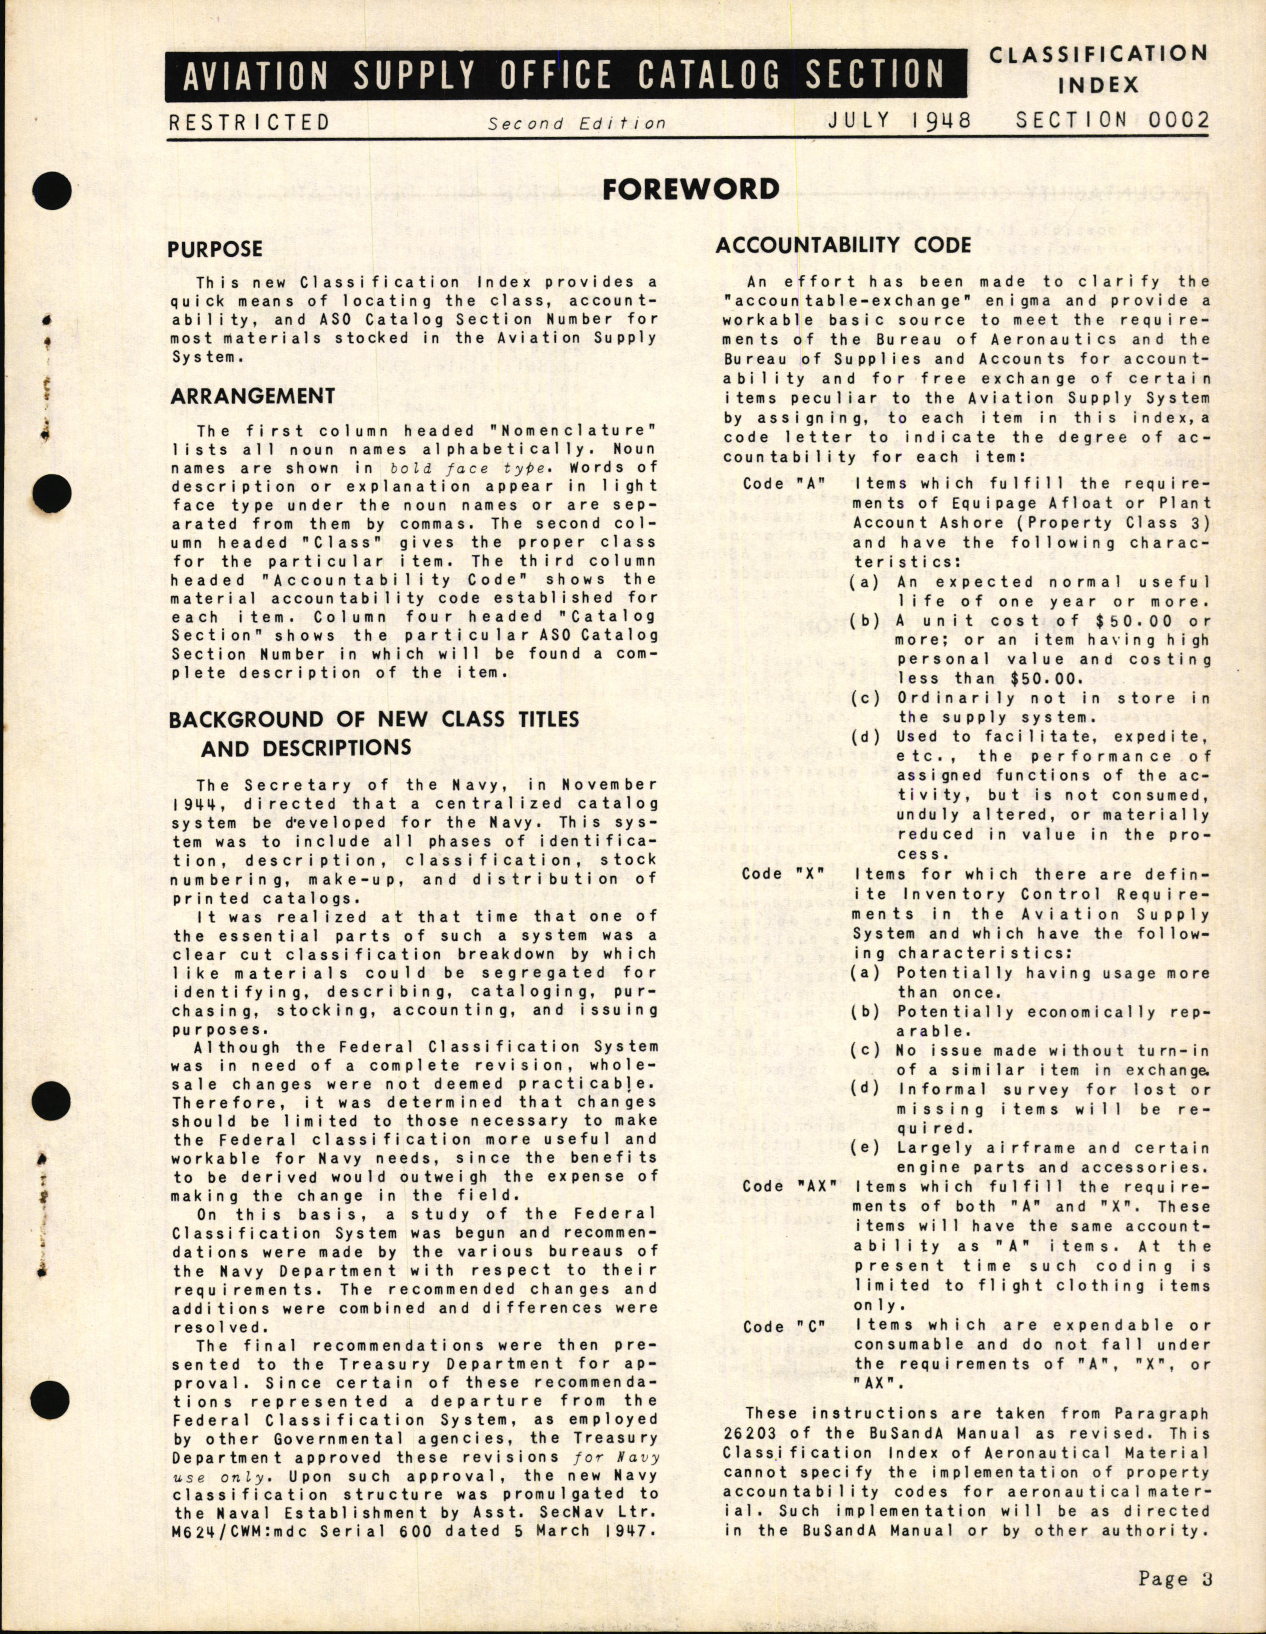 Sample page 5 from AirCorps Library document: Classification Index of Naval Aeronautical Materials